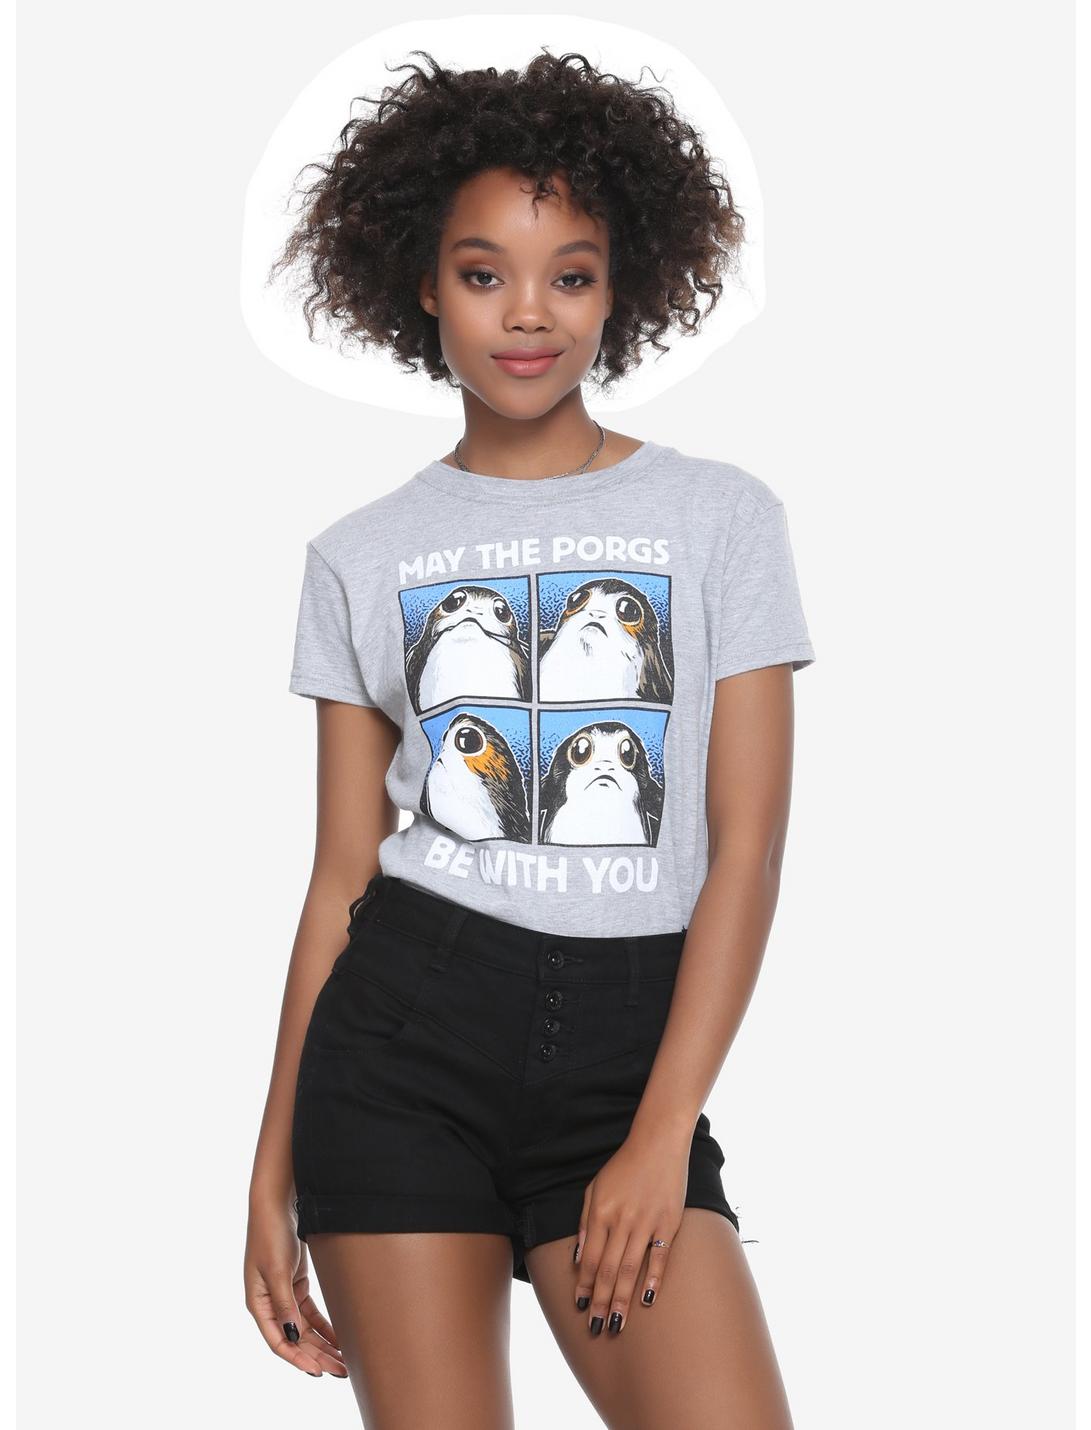 Star Wars Porgs Be With You Girls T-Shirt, GREY, hi-res